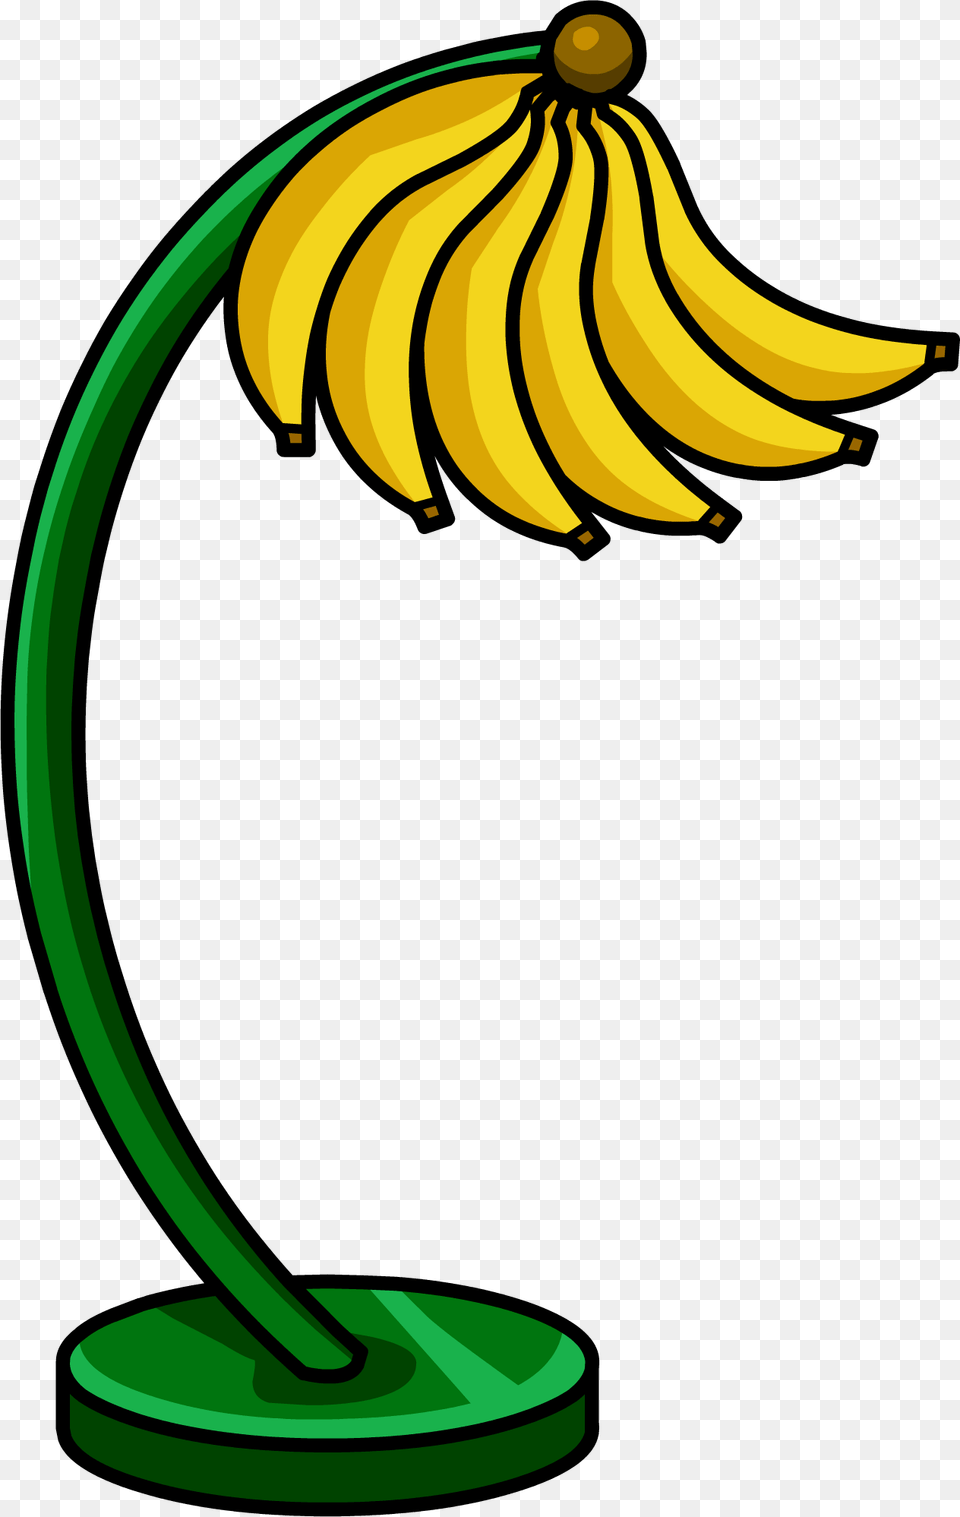 Furniture Icon Club Penguin Banana, Flower, Lamp, Plant, Daisy Free Png Download